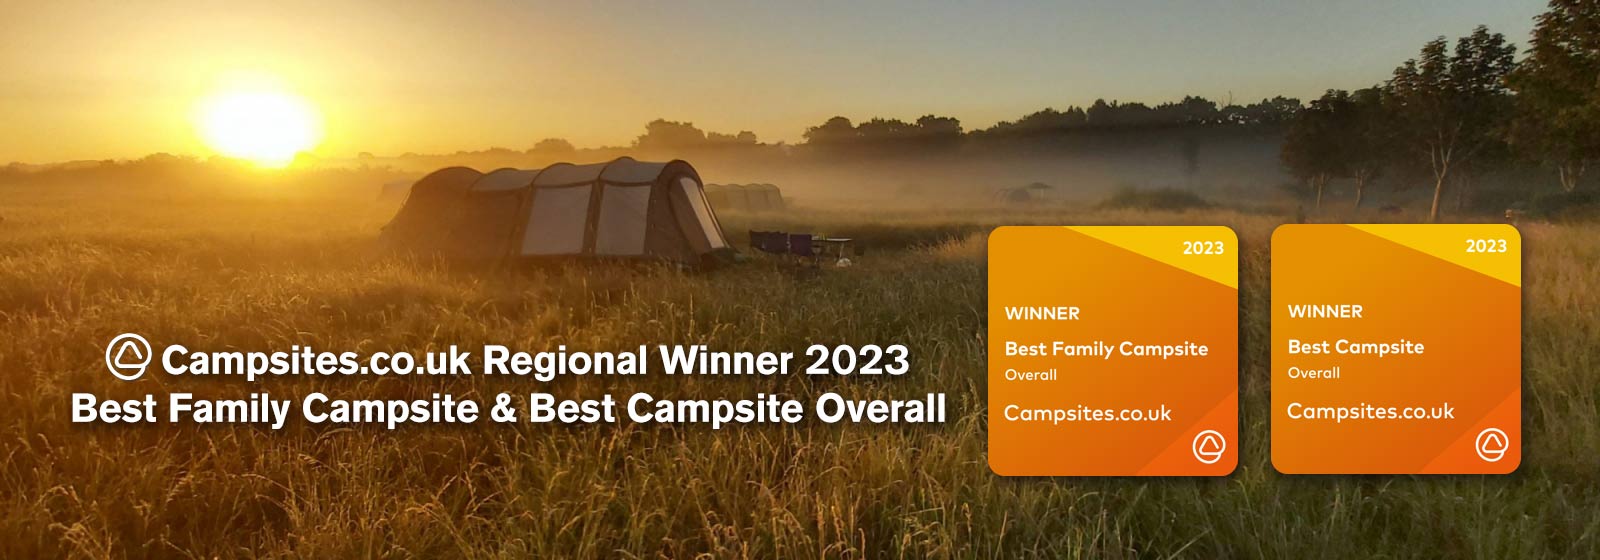 Twiteys Camping and Glamping Meadows Winners